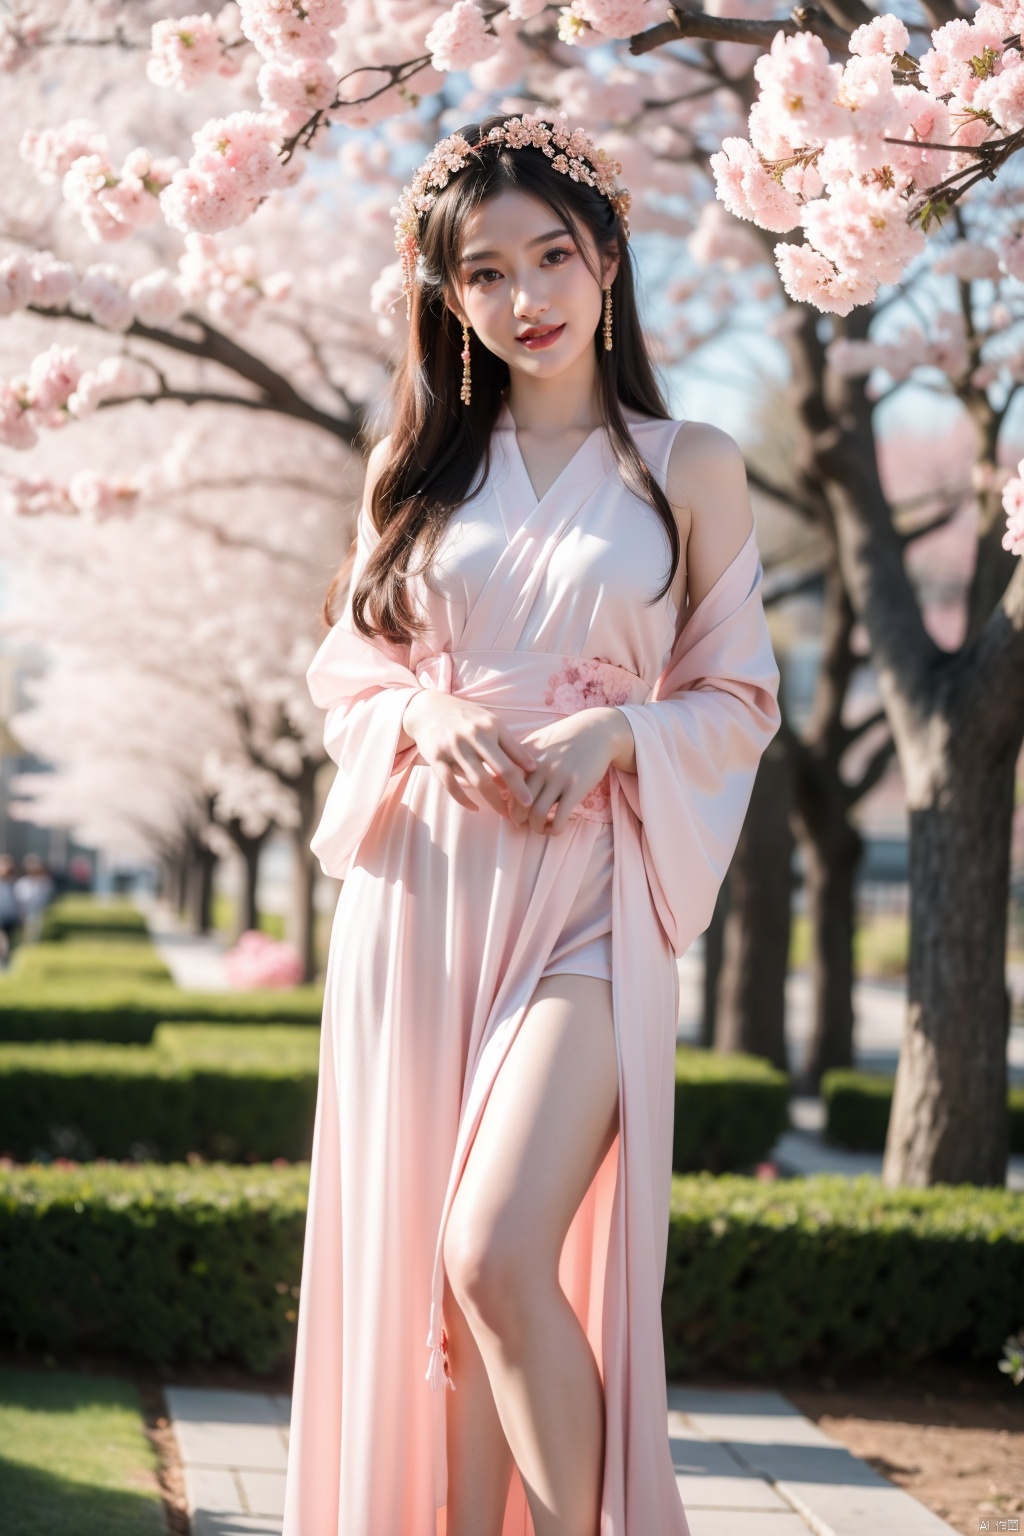 Radiant CG painting, full-body pose (1 girl: 1.2), under a cherry blossom tree, detailed pink petals floating, girl in a kawaii hanfu, hair adorned with flowers, girlish figure highlighted, sparkling eyes, delicate features, cheerful grin, romantic springtime feel, bokeh of blossoms overhead, (sparkling eyes: 1.3), (delicate face: 1.3), (girlish figure: 1.3), (romantic setting: 1.3), (pink hues: 1.2)